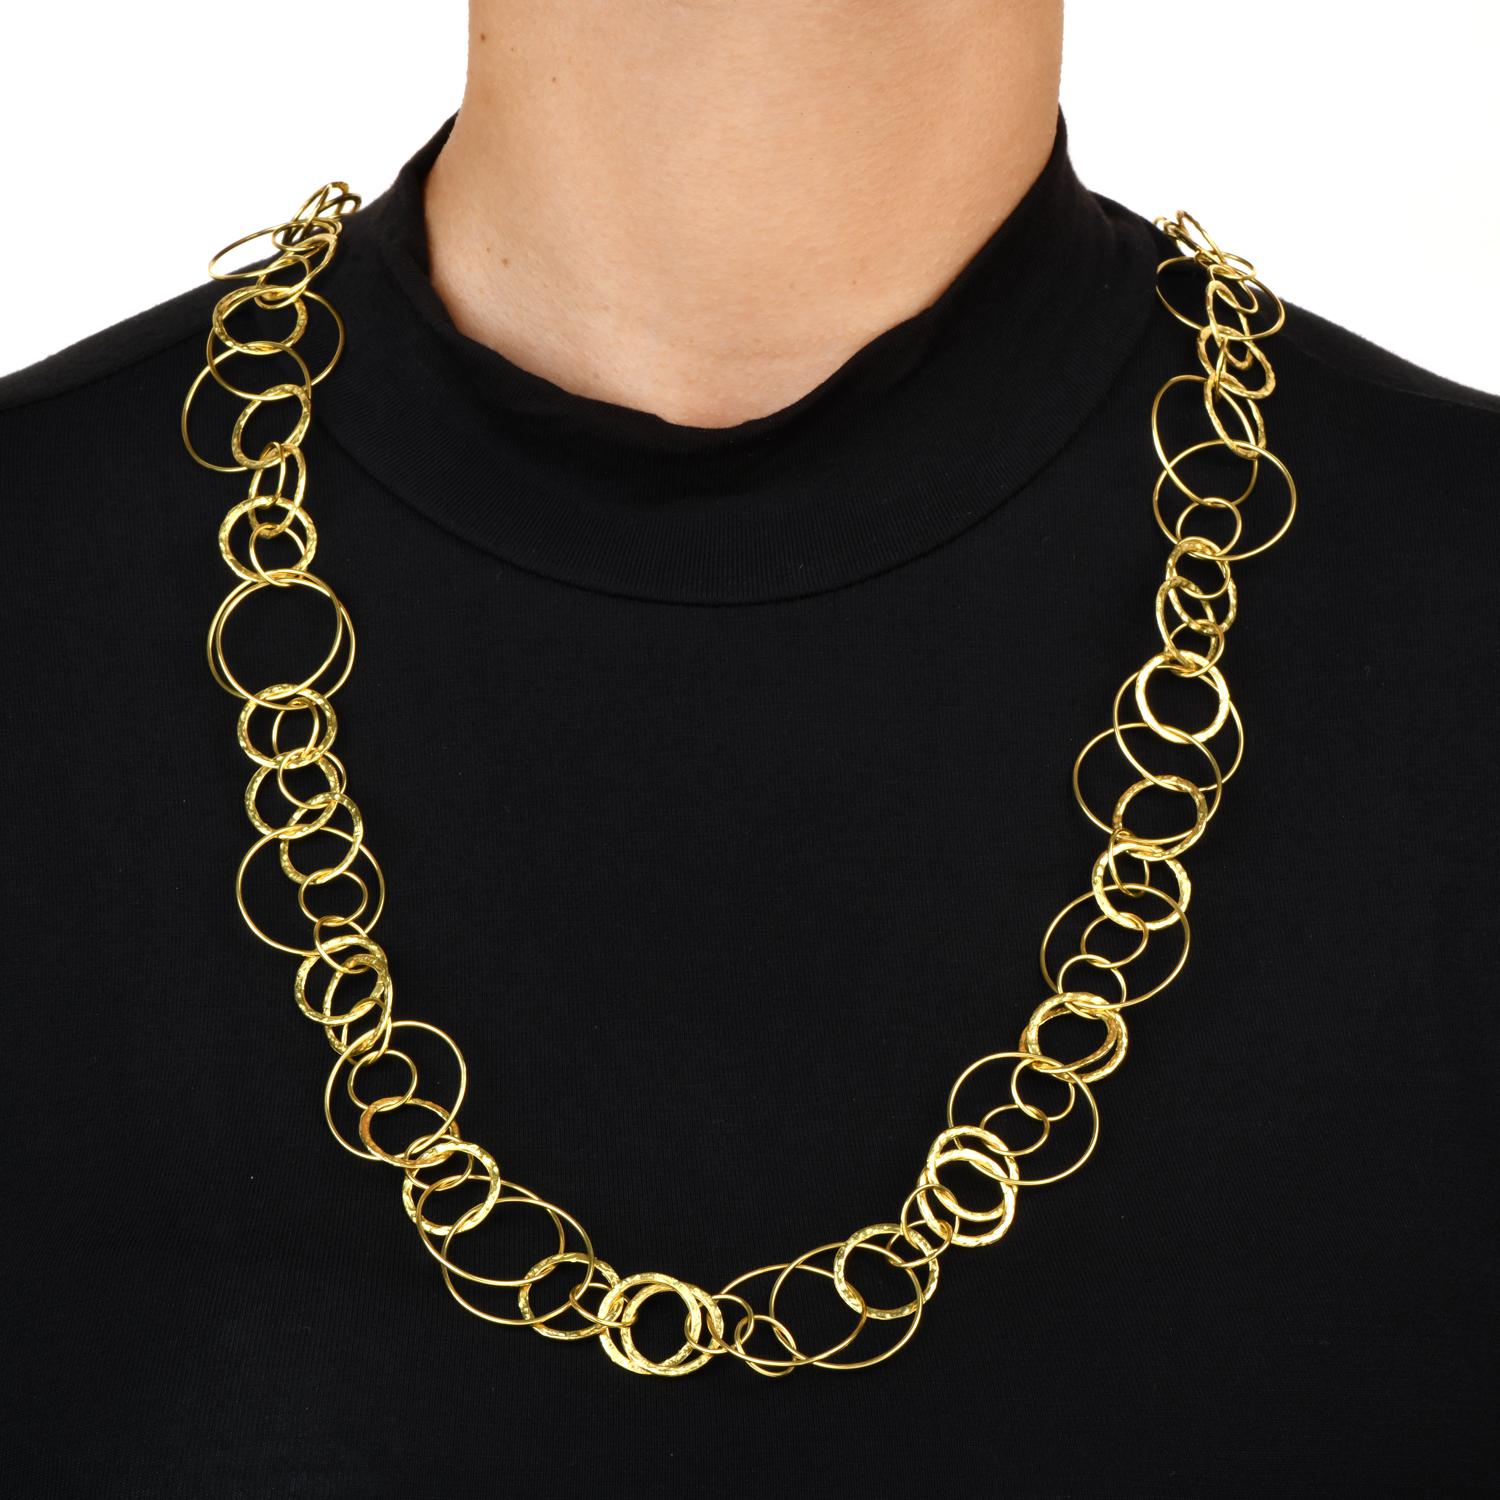 A timeless elegant and opulent Spitzer & Furman necklace.

Crafted in solid 18K yellow gold, featuring a combination of hammered and polished links.

The complete piece is approximately 31'', with a Multi hoop link chain necklace secured with an